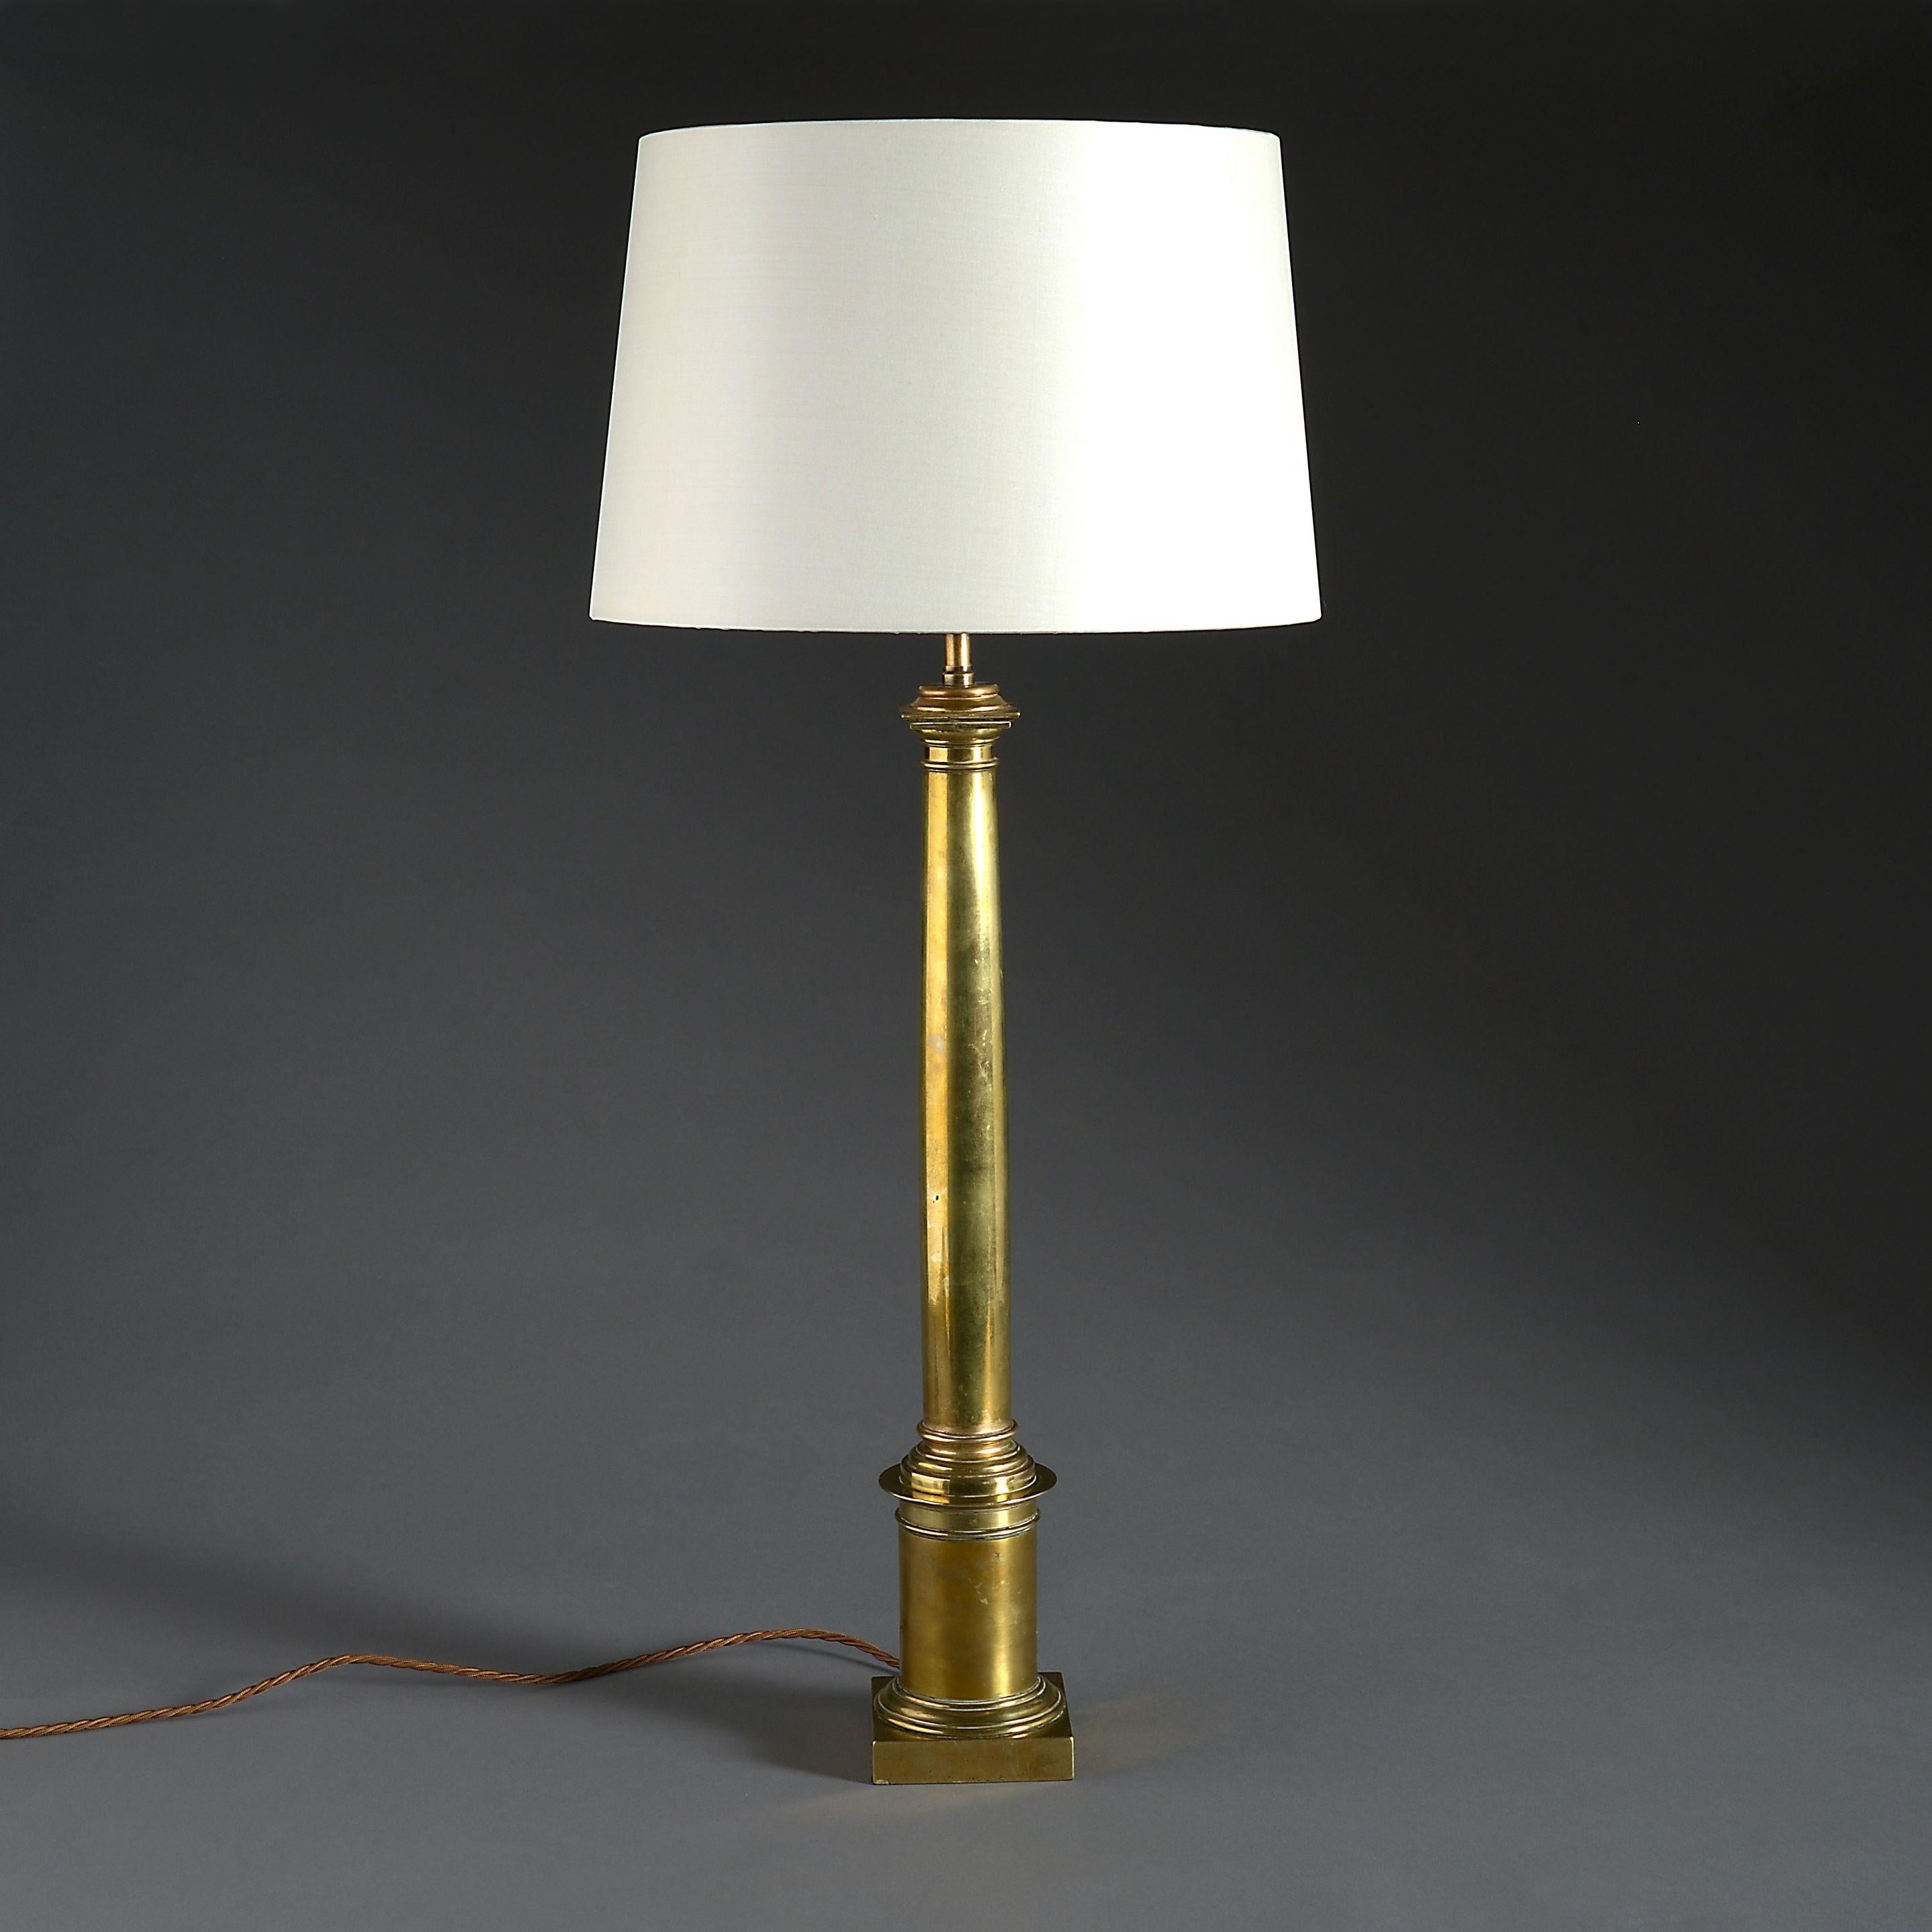 A mid-19th century brass column lamp, having doric capital and set upon a round socle base. 

Wired for electricity.